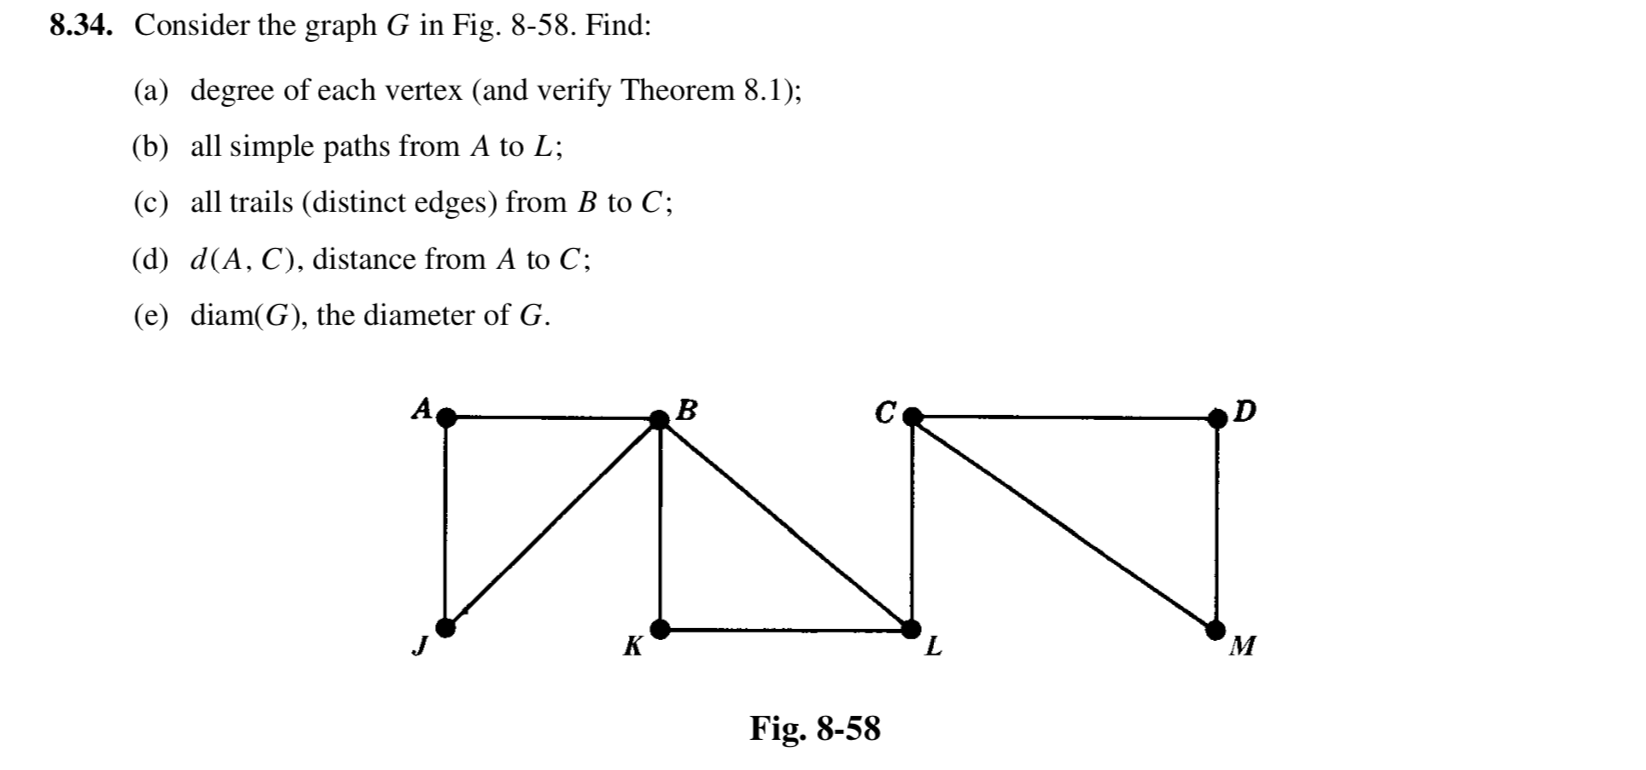 Consider the graph G in Fig. 8-58. Find:
(a) degree of each vertex (and verify Theorem 8.1);
(b) all simple paths from A to L;
(c) all trails (distinct edges) from B to C;
(d) d(A, C), distance from A to C;
